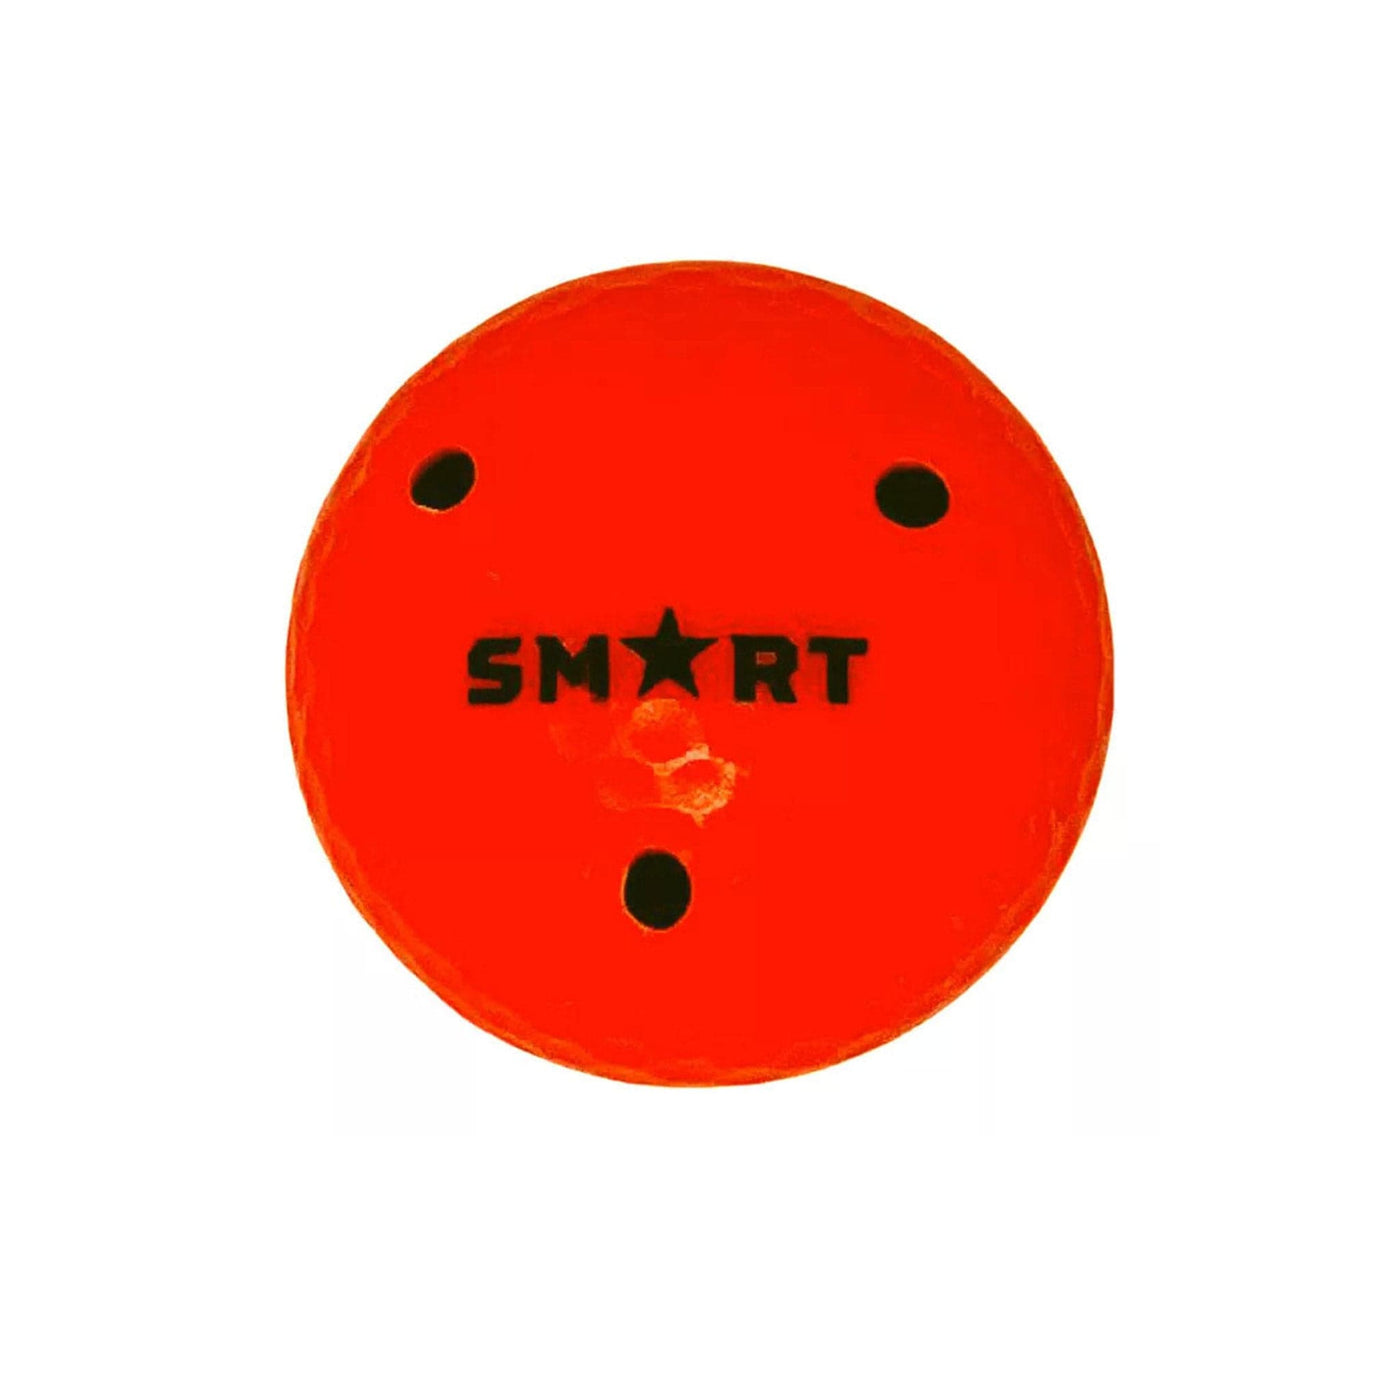 Bright orange ball weighing 6 ounces used for improving stickhandling and puck control skills. Stickhandling, training, puck handling, medicine ball, hard ball, training ball, weighted ball, skills.